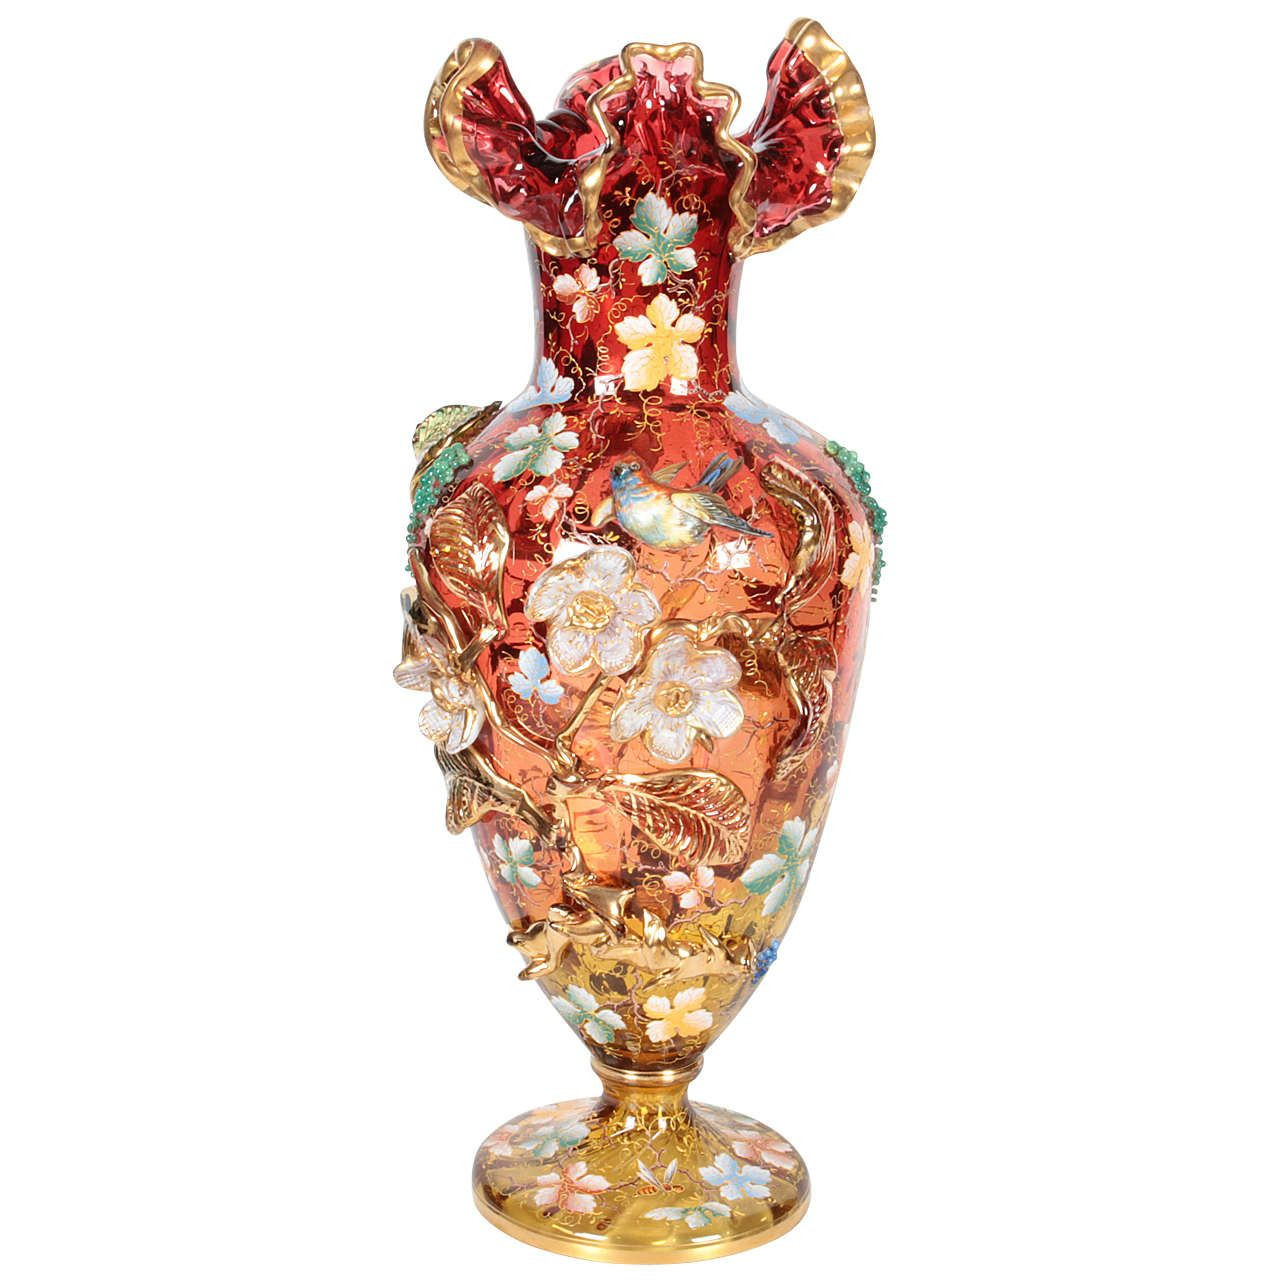 27 Lovable Moser Glass Vase 2024 free download moser glass vase of moser glass amberina red vase with raised flowers leaves jewels pertaining to moser glass amberina red vase with raised flowers leaves jewels and bird from a unique colle